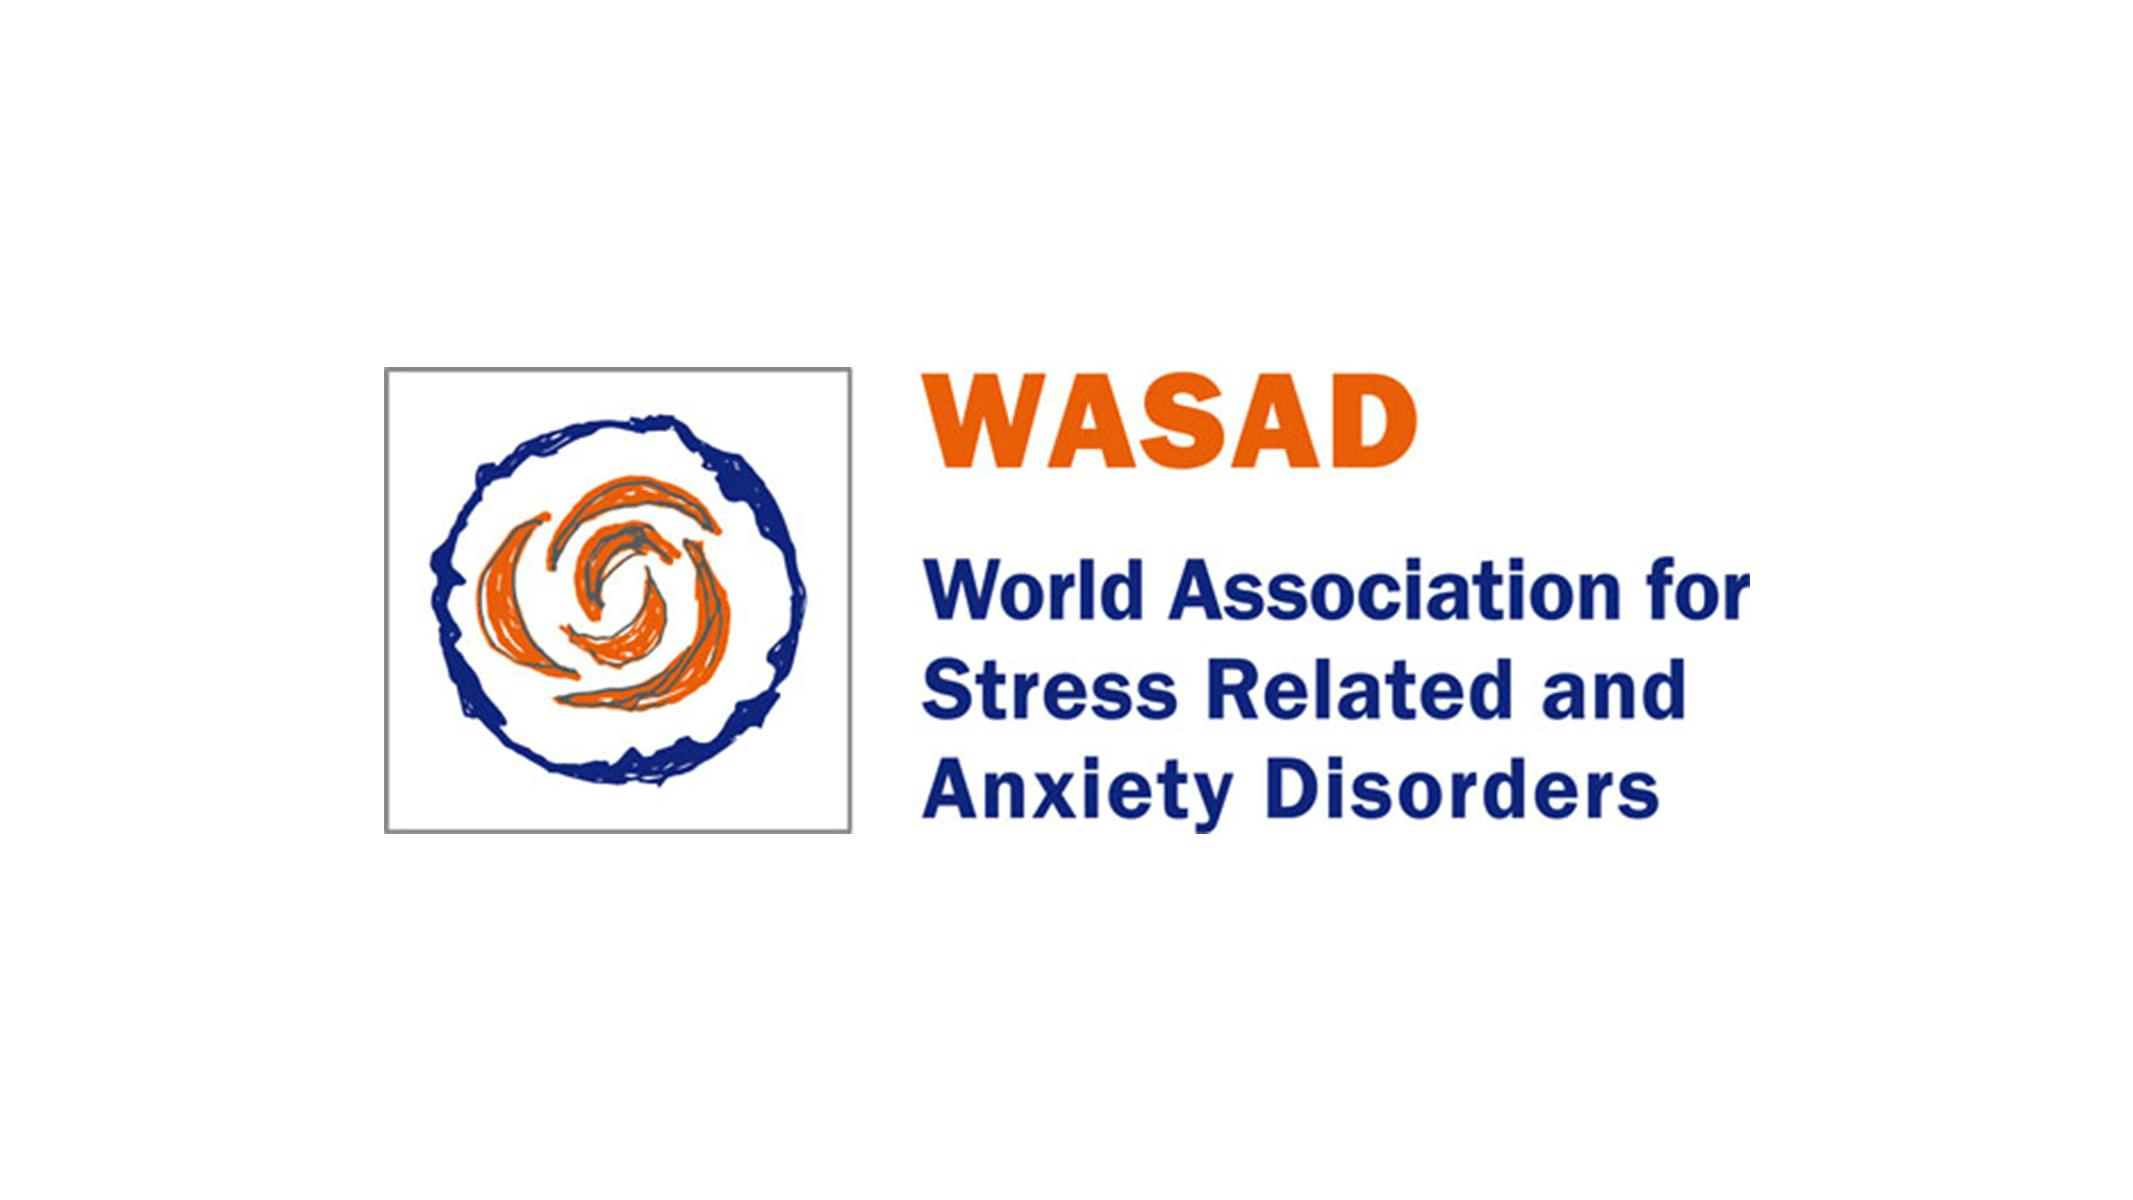 Logo of the World Association for Stress Related and Anxiety Disorders.